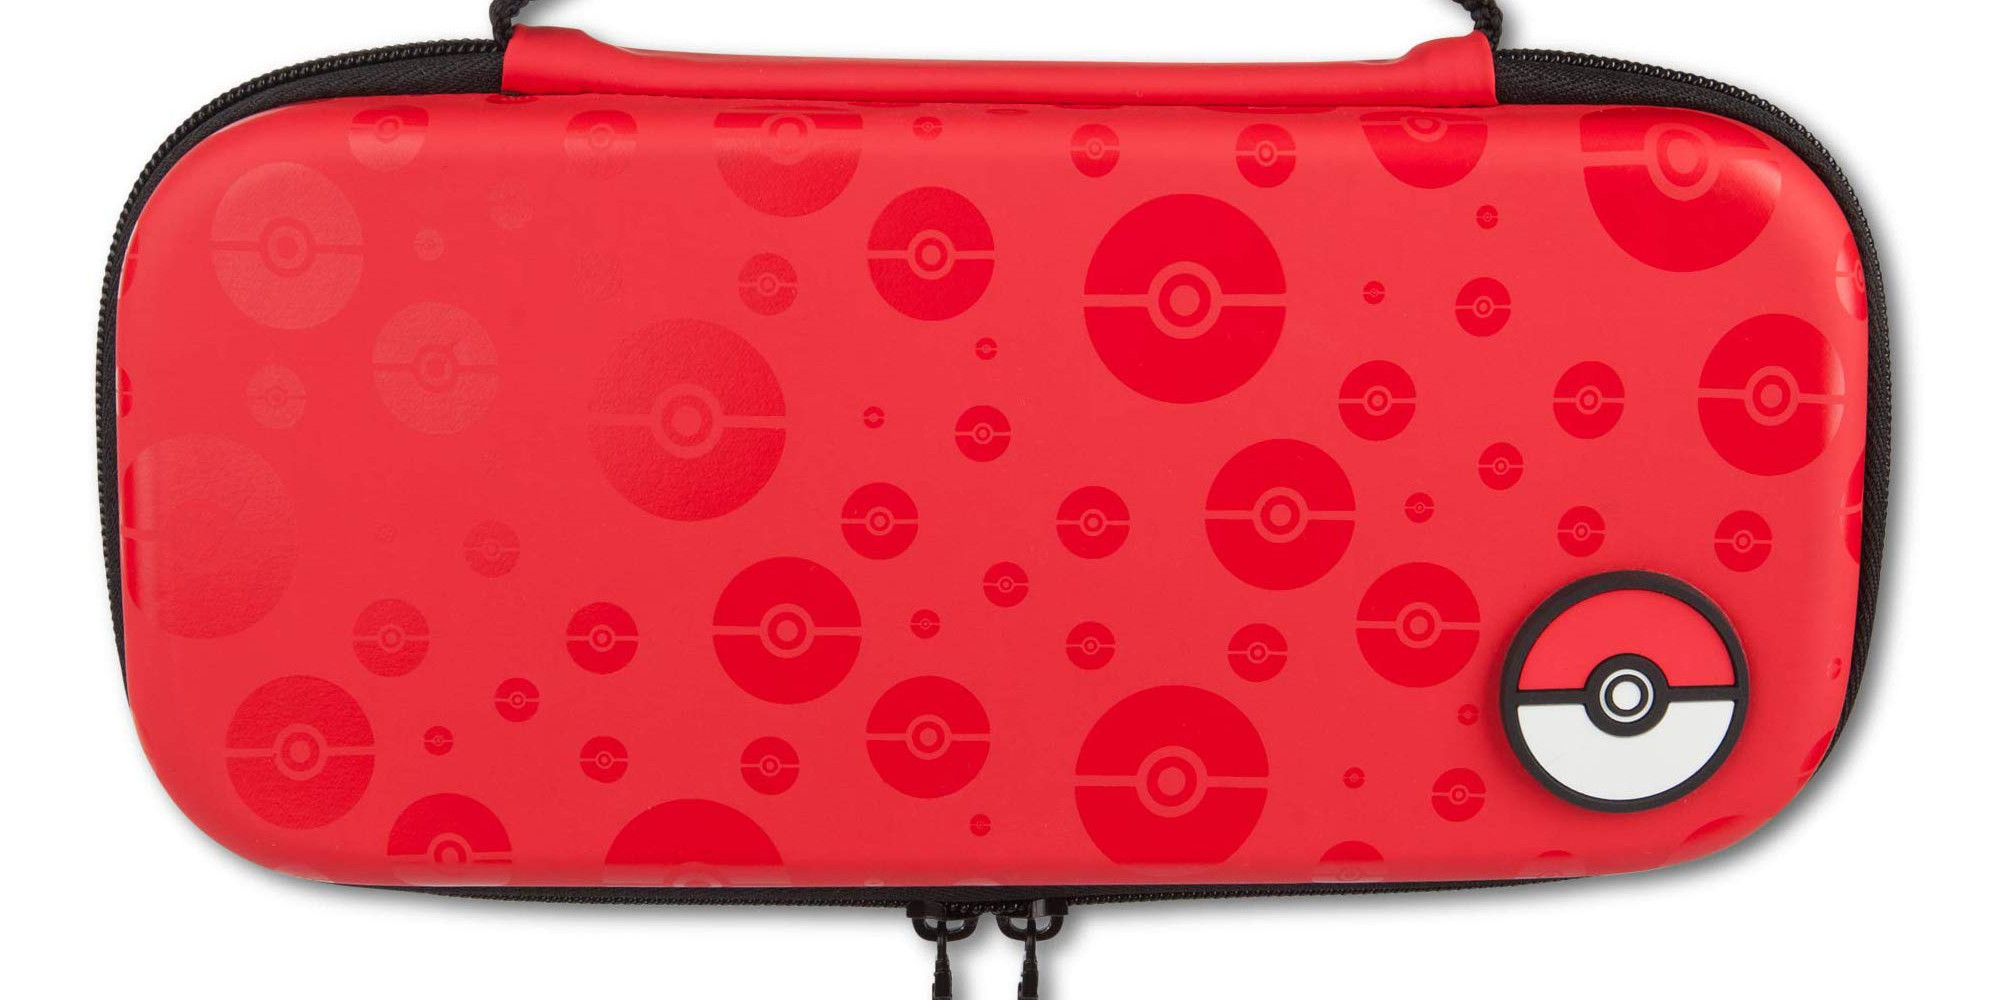 PowerA Poke Ball Nintendo Switch Case at 25% off + more accessories ...